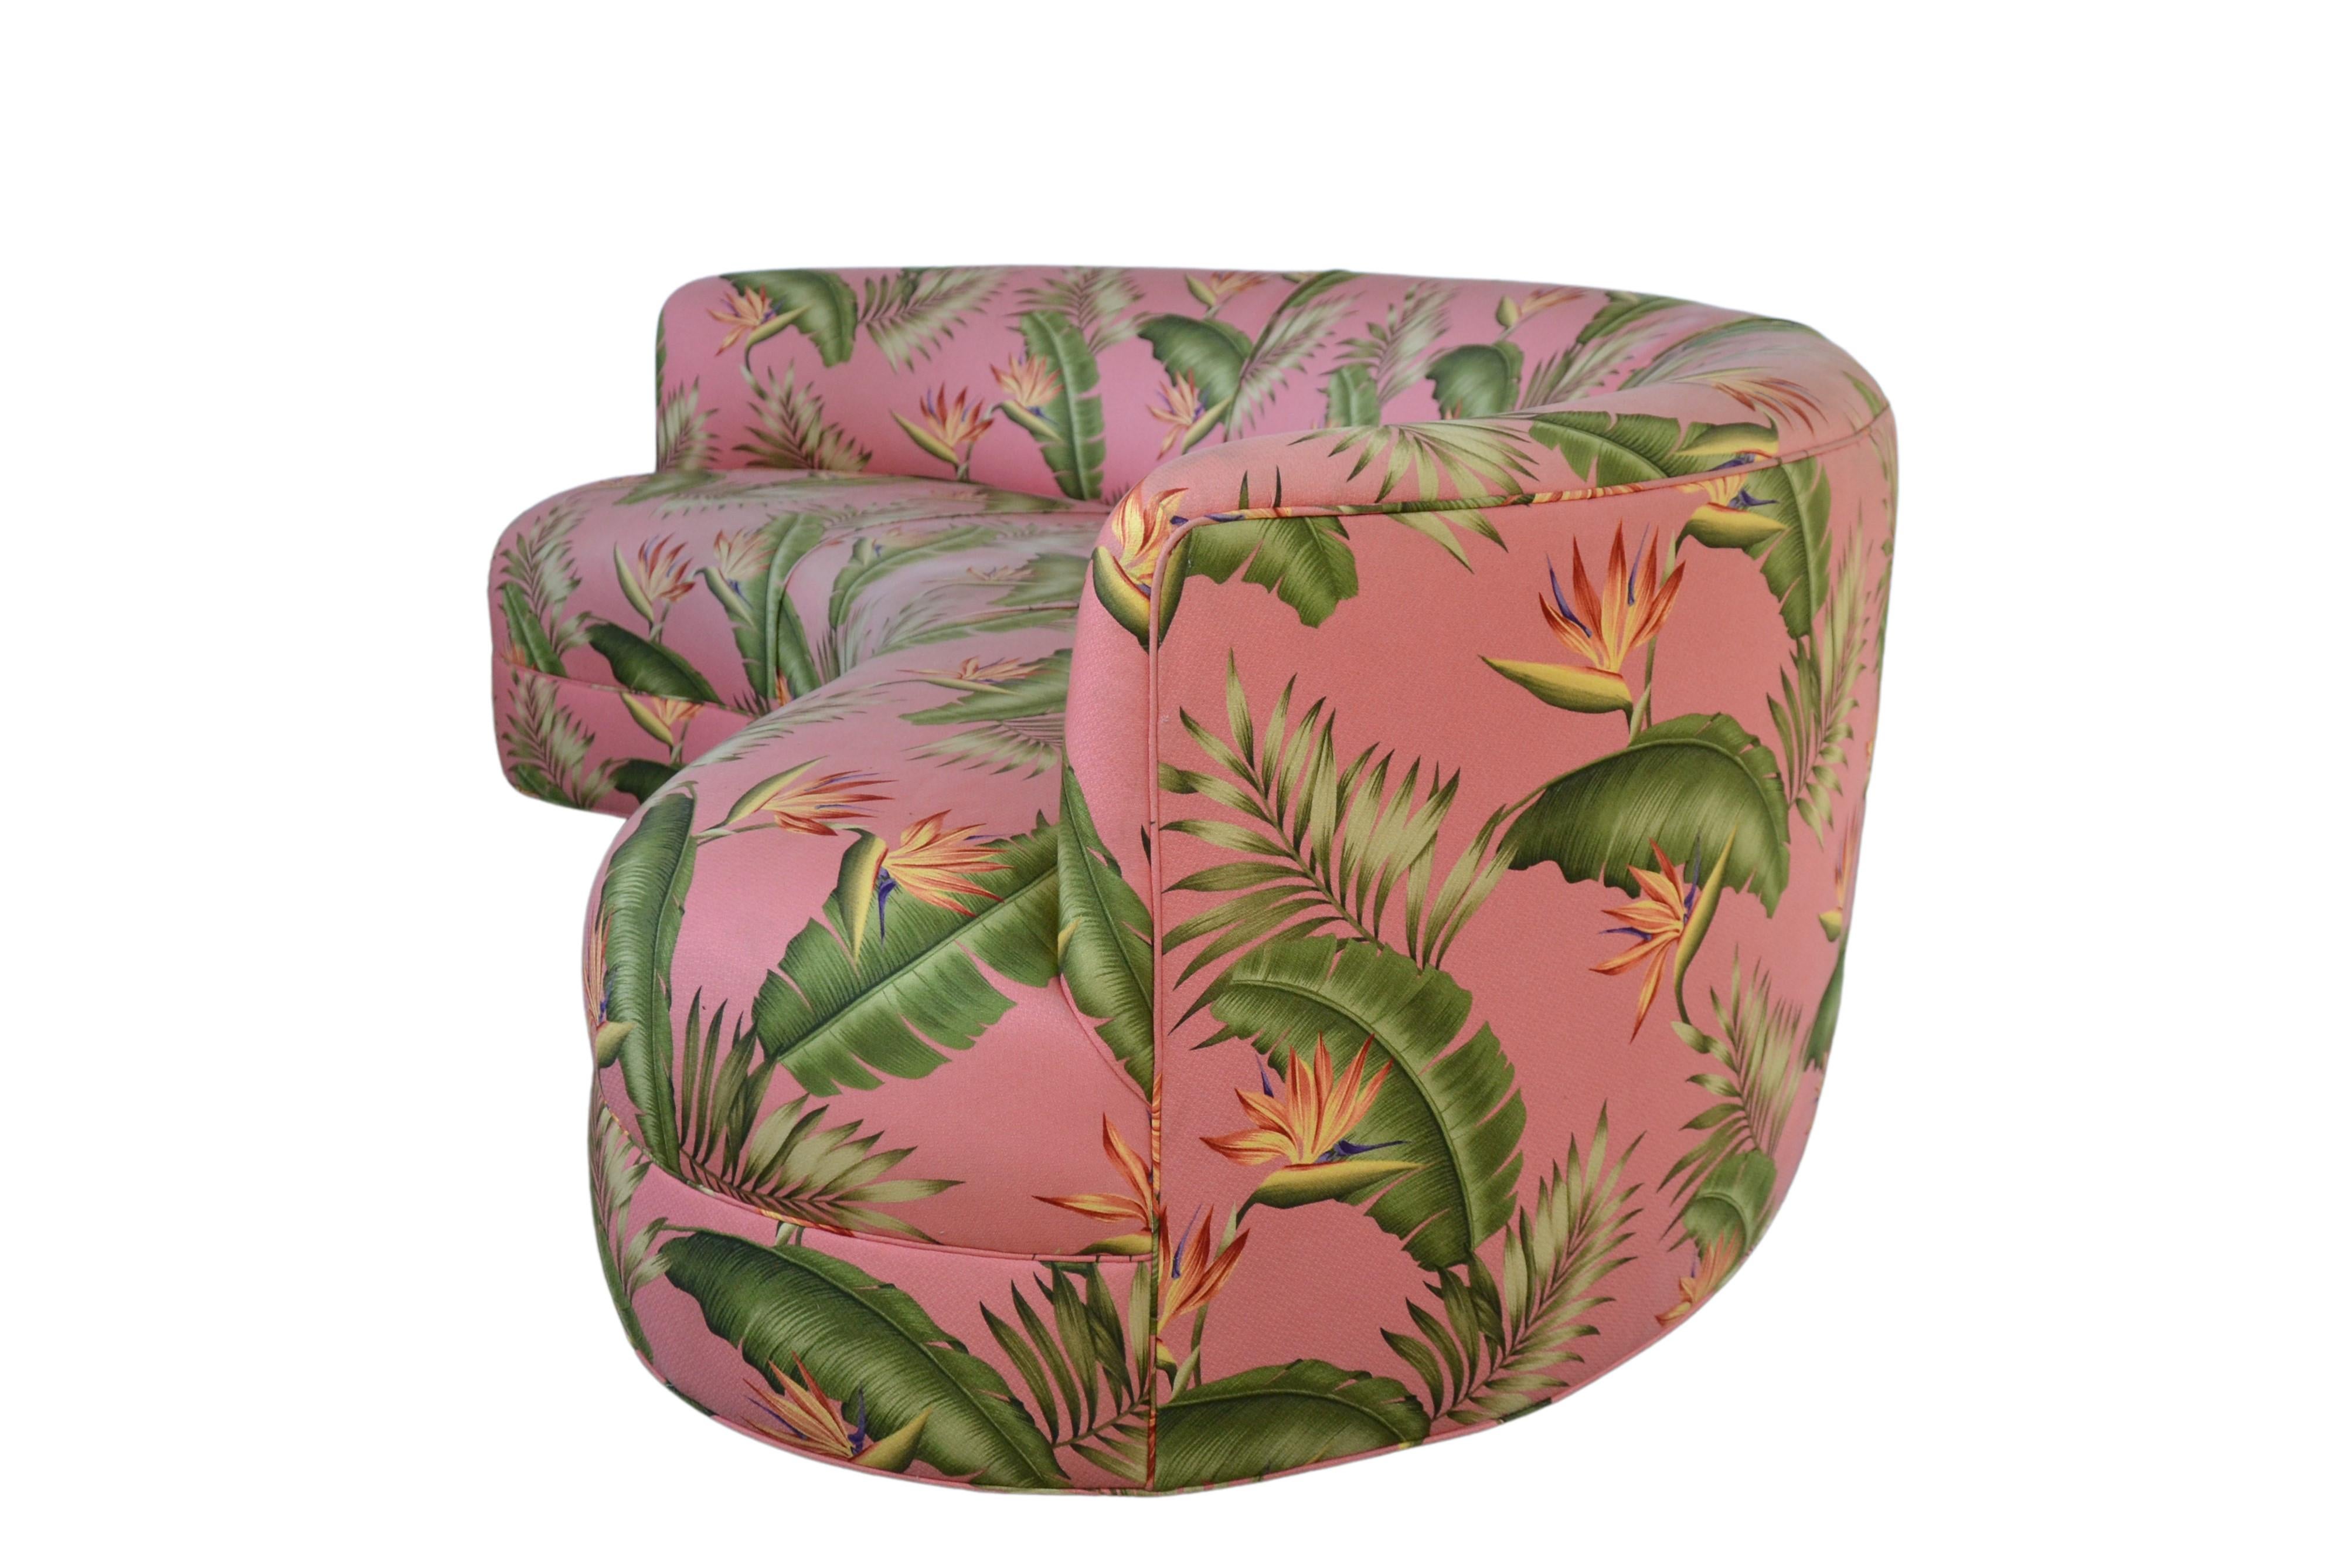 1980s serpentine sofa by Vladimir Kagan. The sofa is covered in a tropical pattern fabric. 